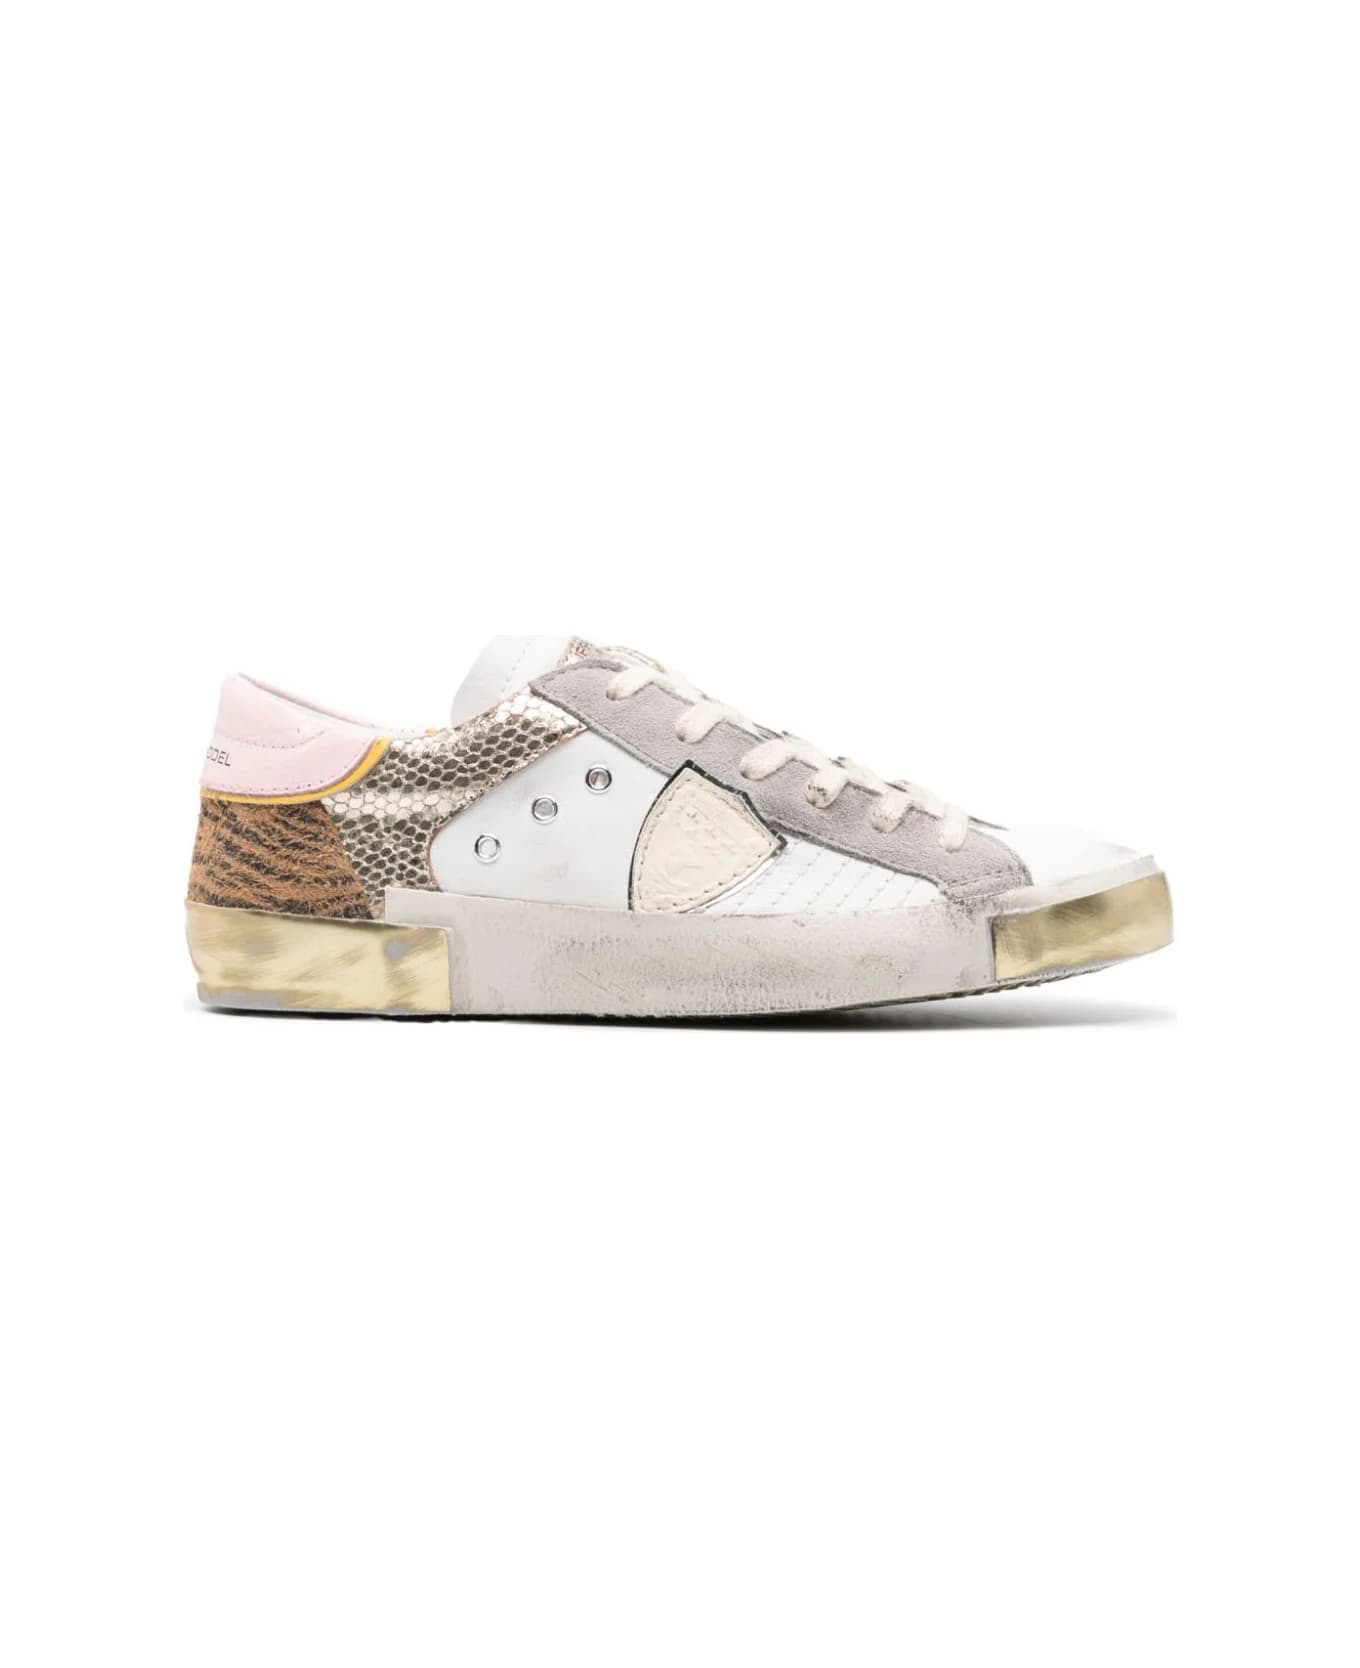 Philippe Model Prsx Low Sneakers - White, Animalier And Gold スニーカー